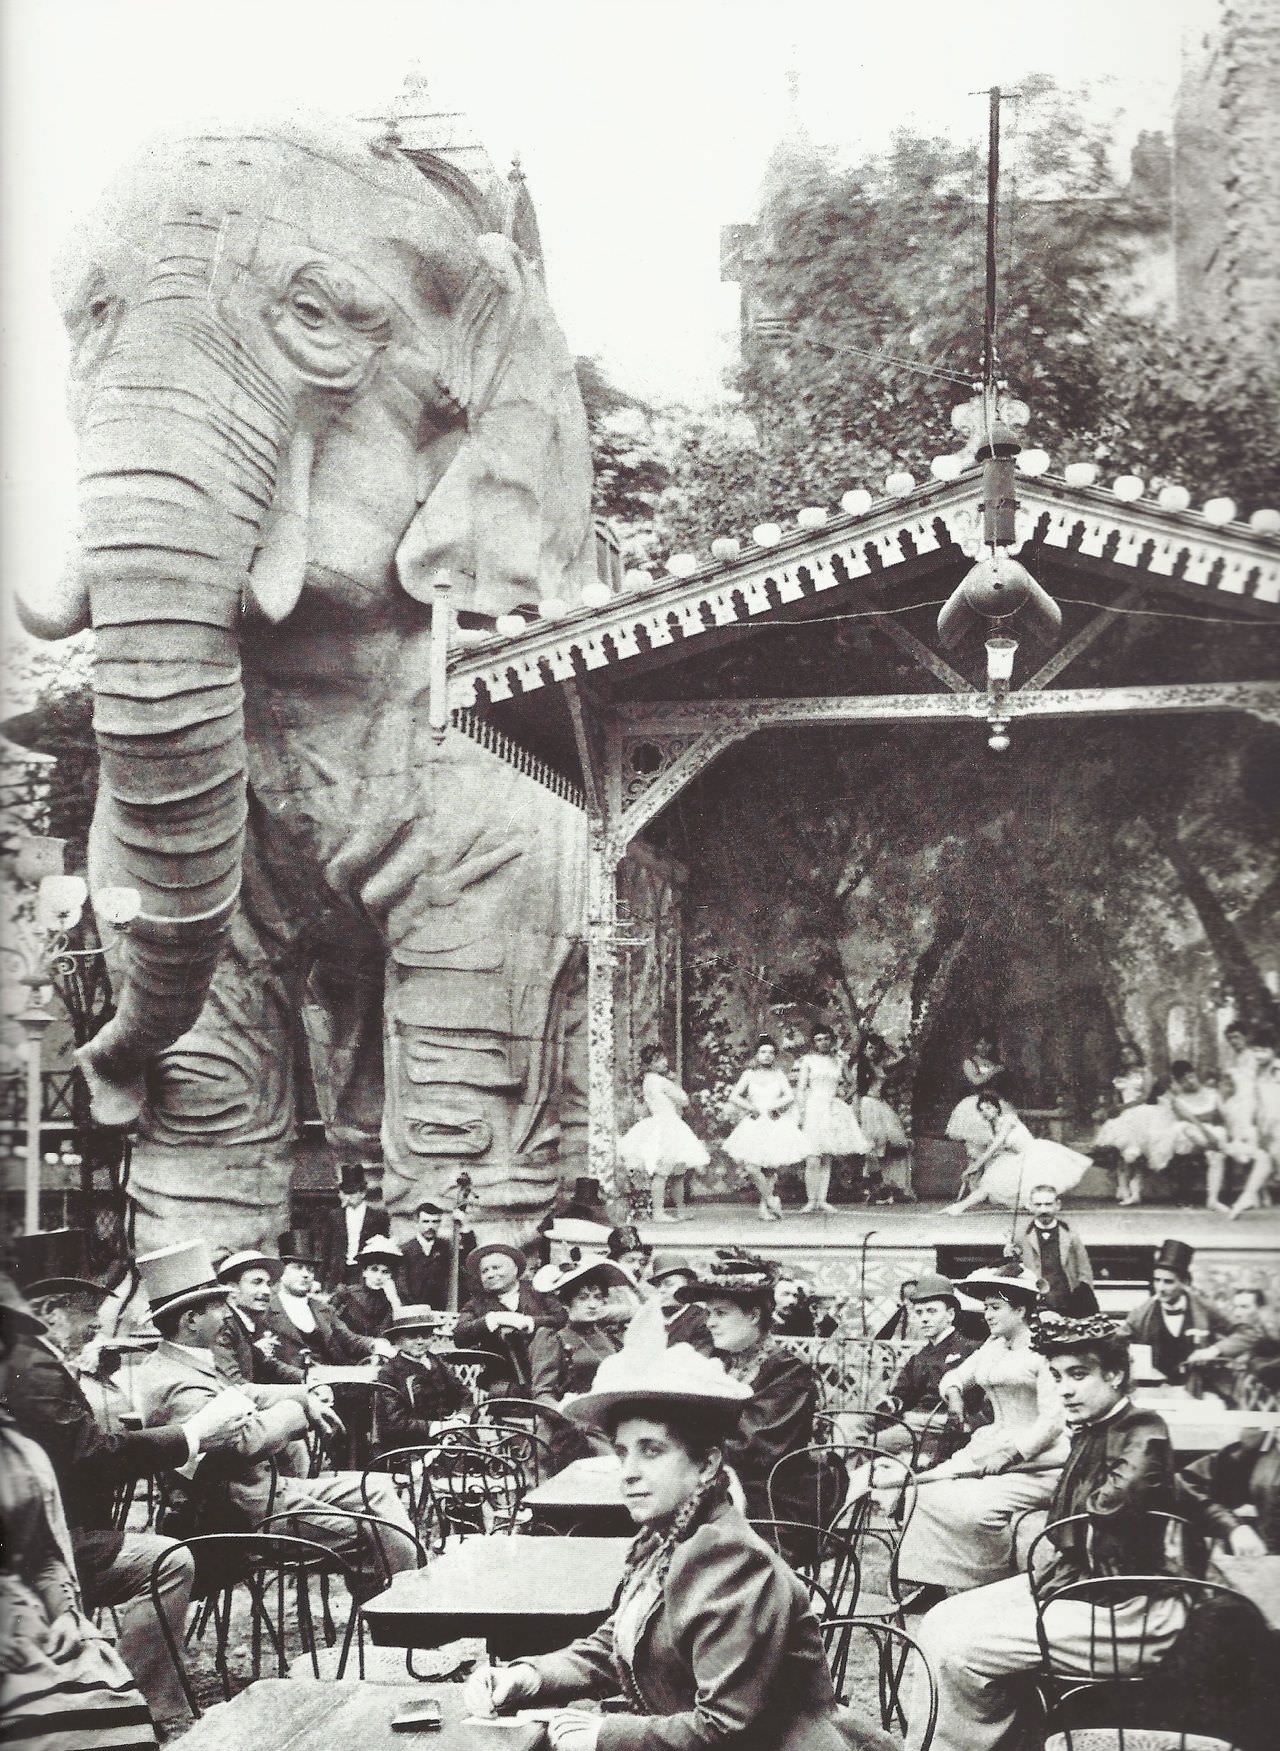 A giant elephant statue overlooks the gardens of Moulin Rouge in Paris, France in 1901.